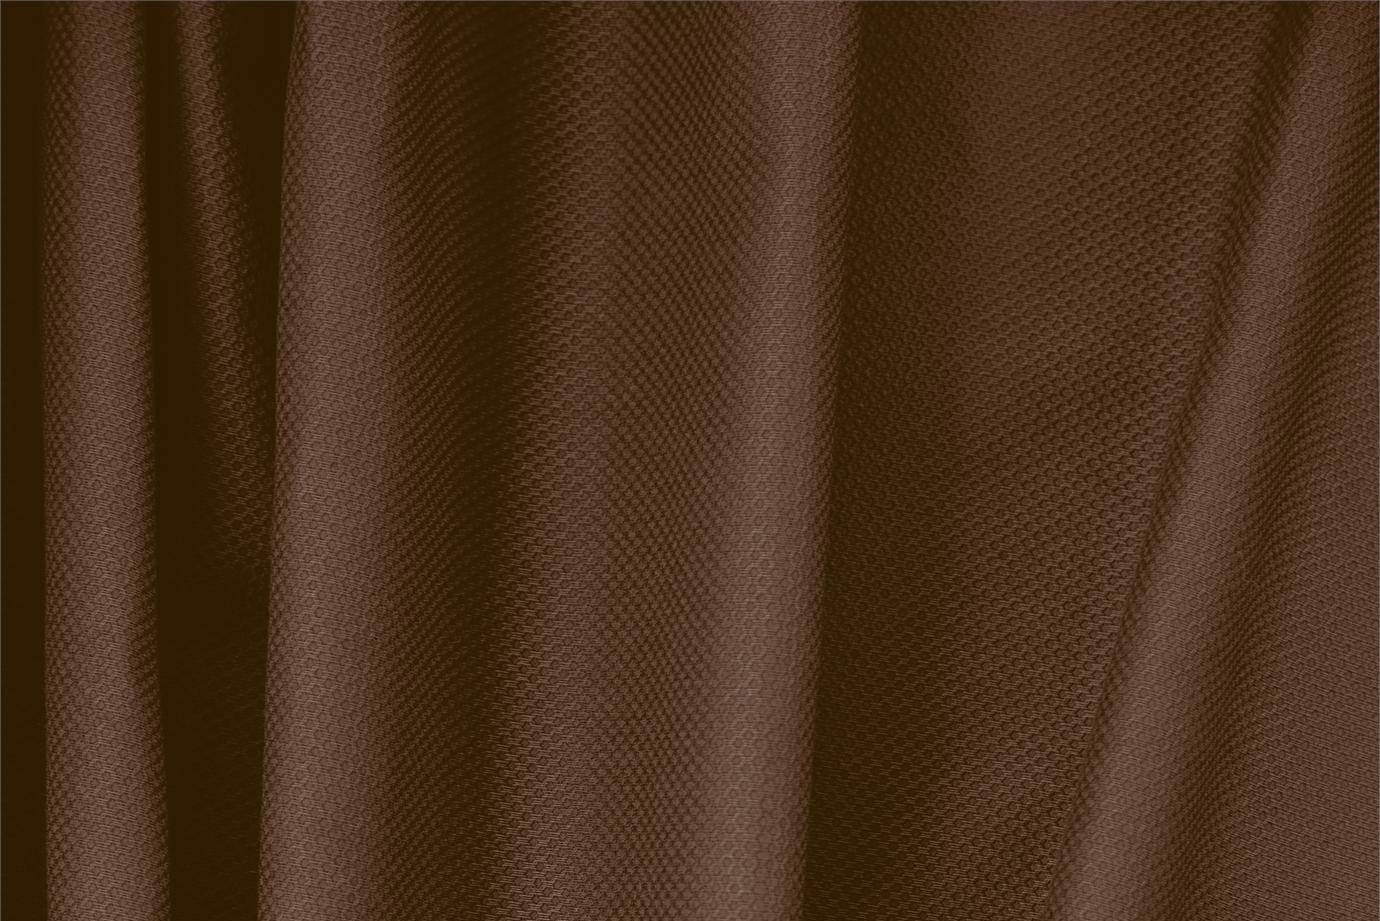 Cocoa Brown Cotton, Stretch Pique Stretch fabric for dressmaking